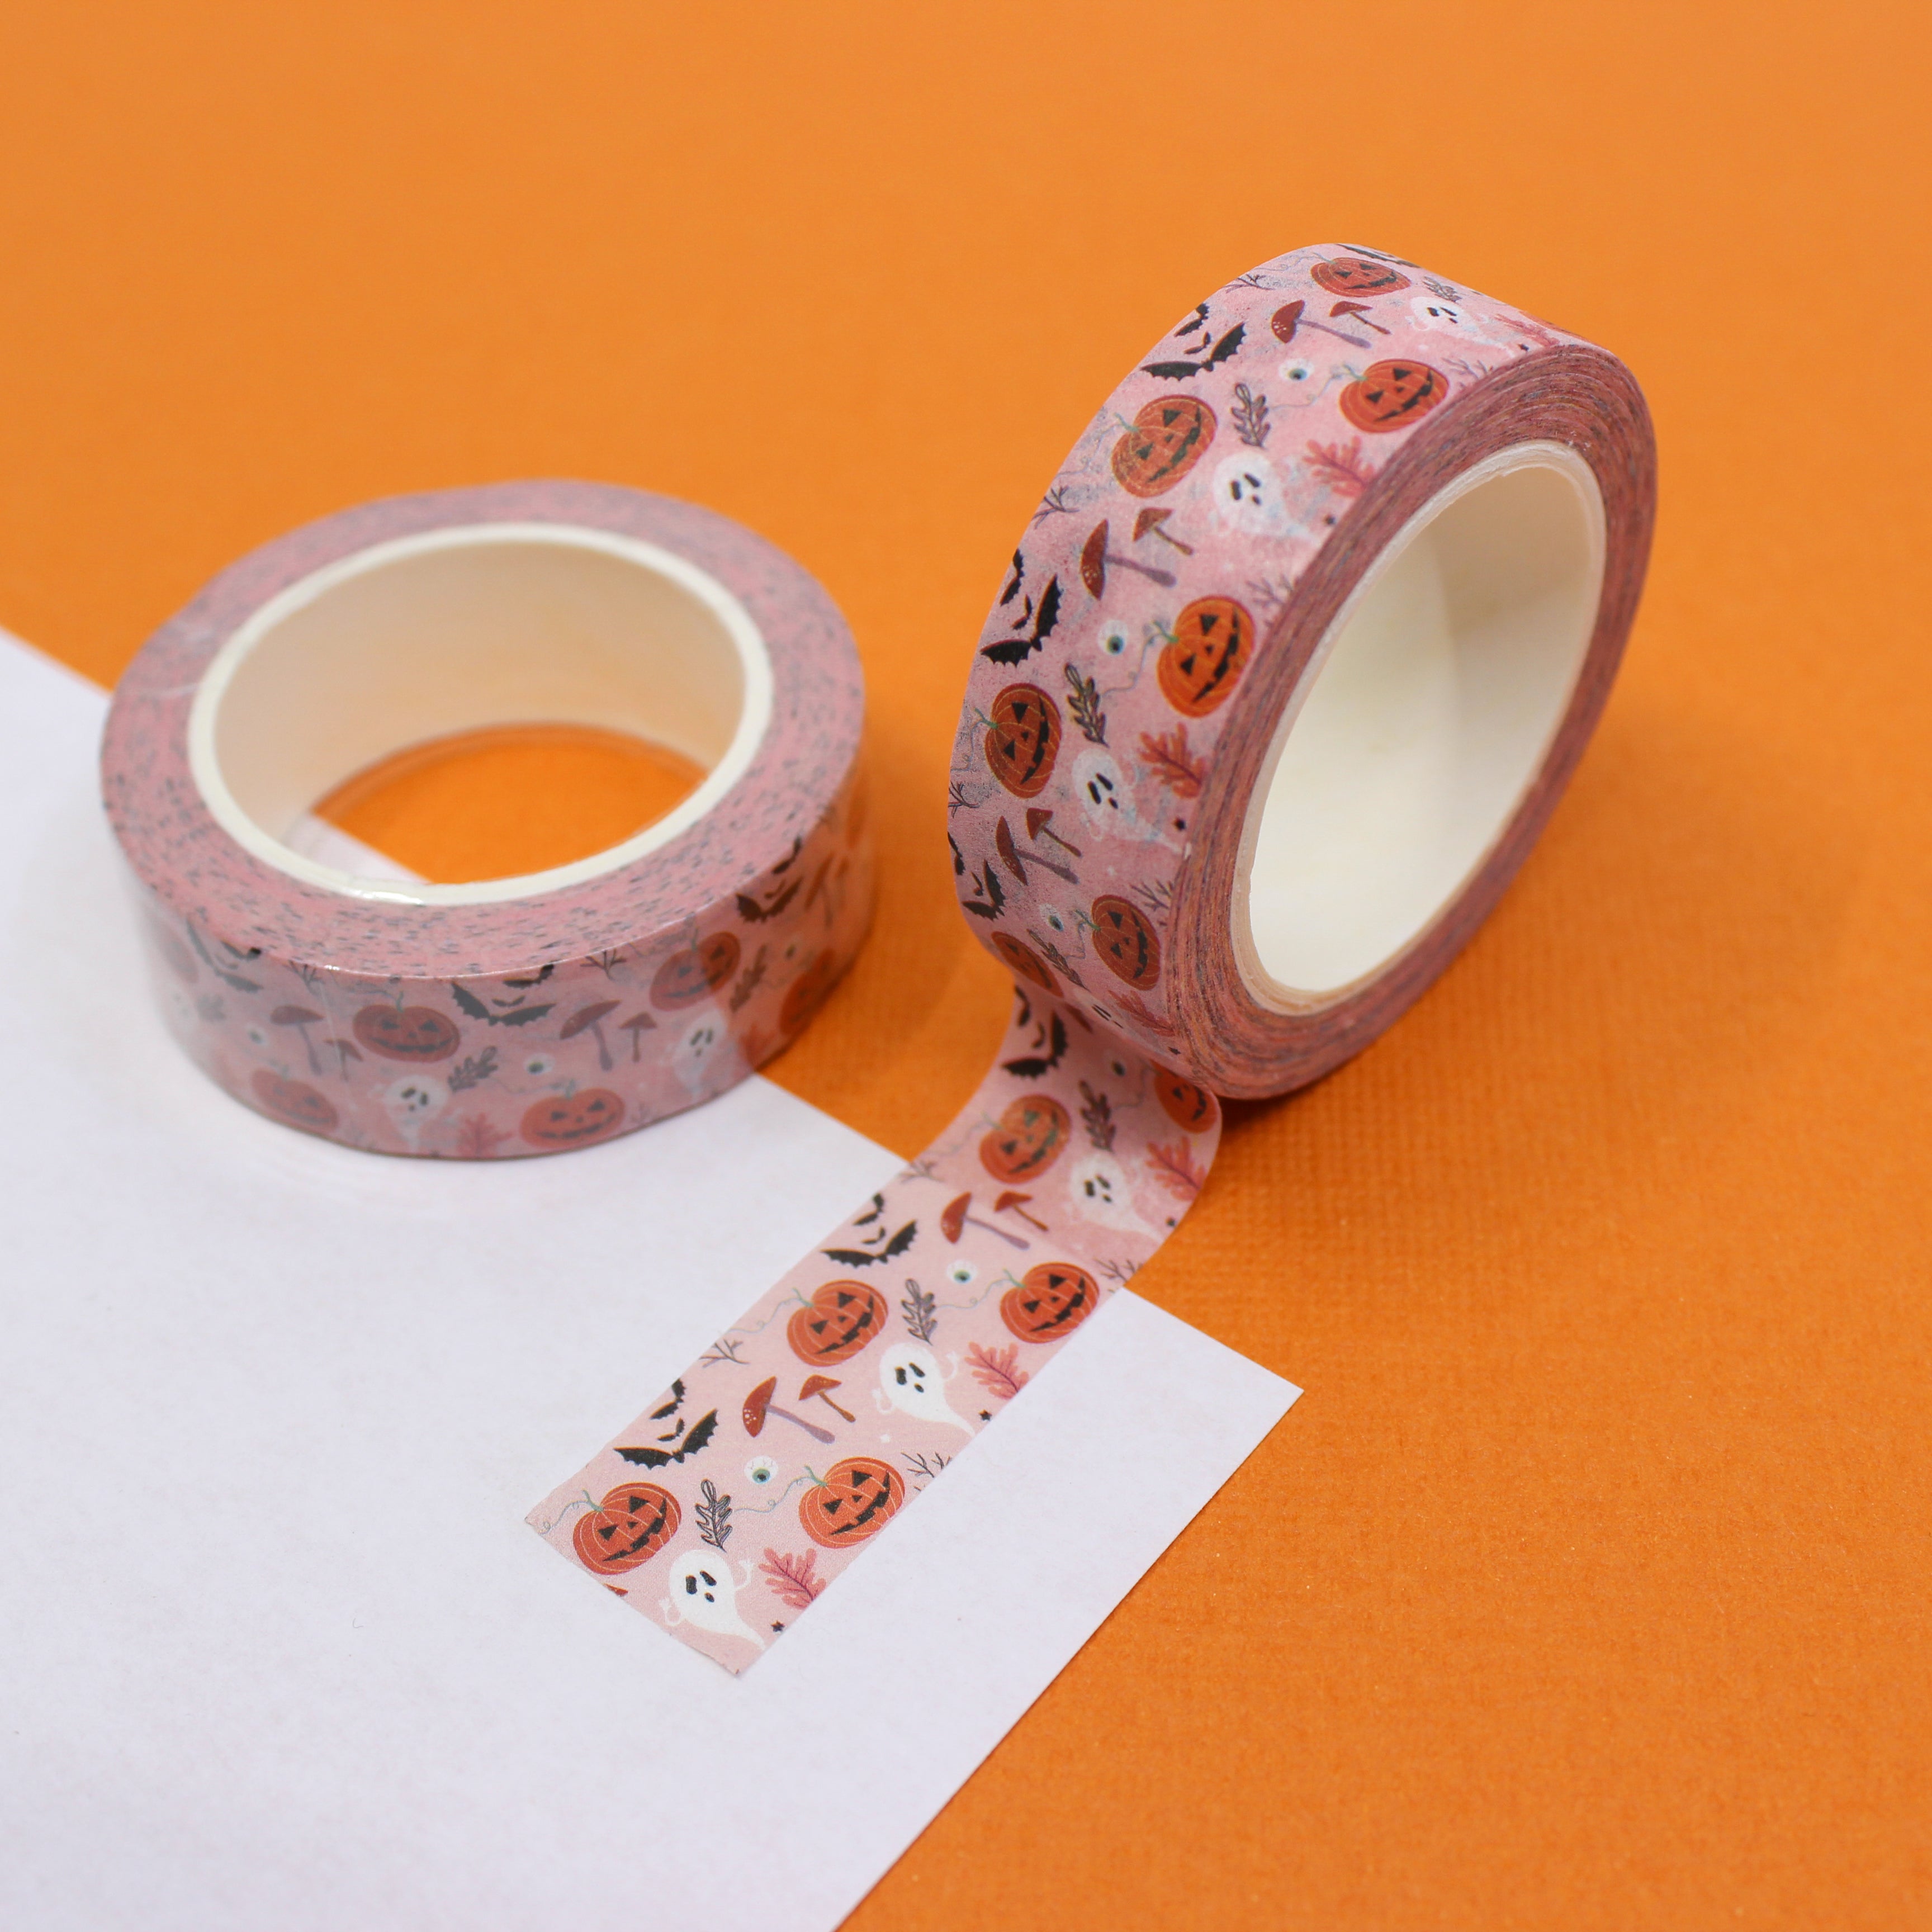 This is a cute pumpkin ghost and mushrooms pattern washi tape from BBB Supplies Craft Shop